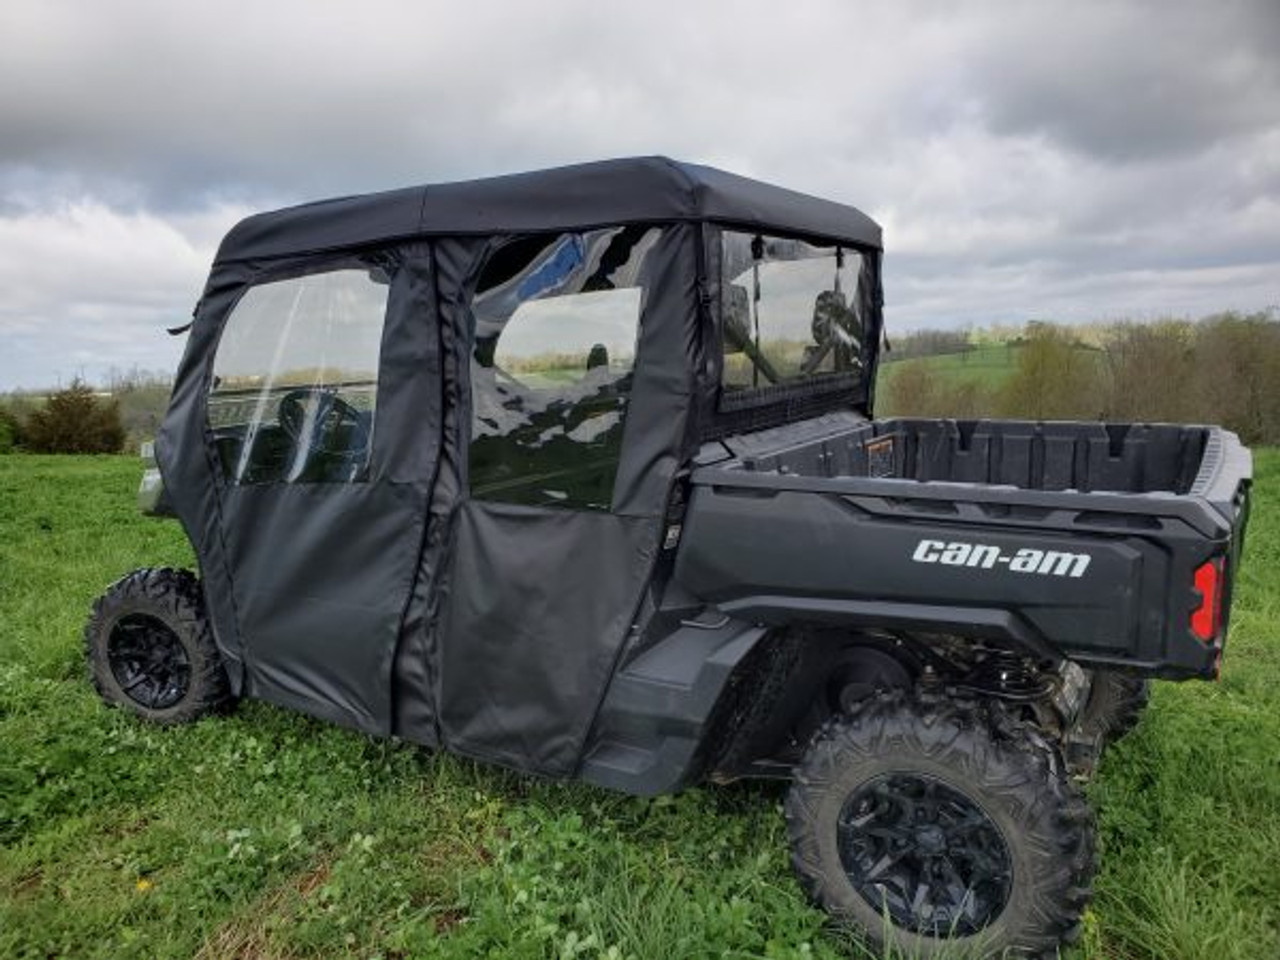 3 Star side x side can-am defender max full cab enclosure side and rear angle view